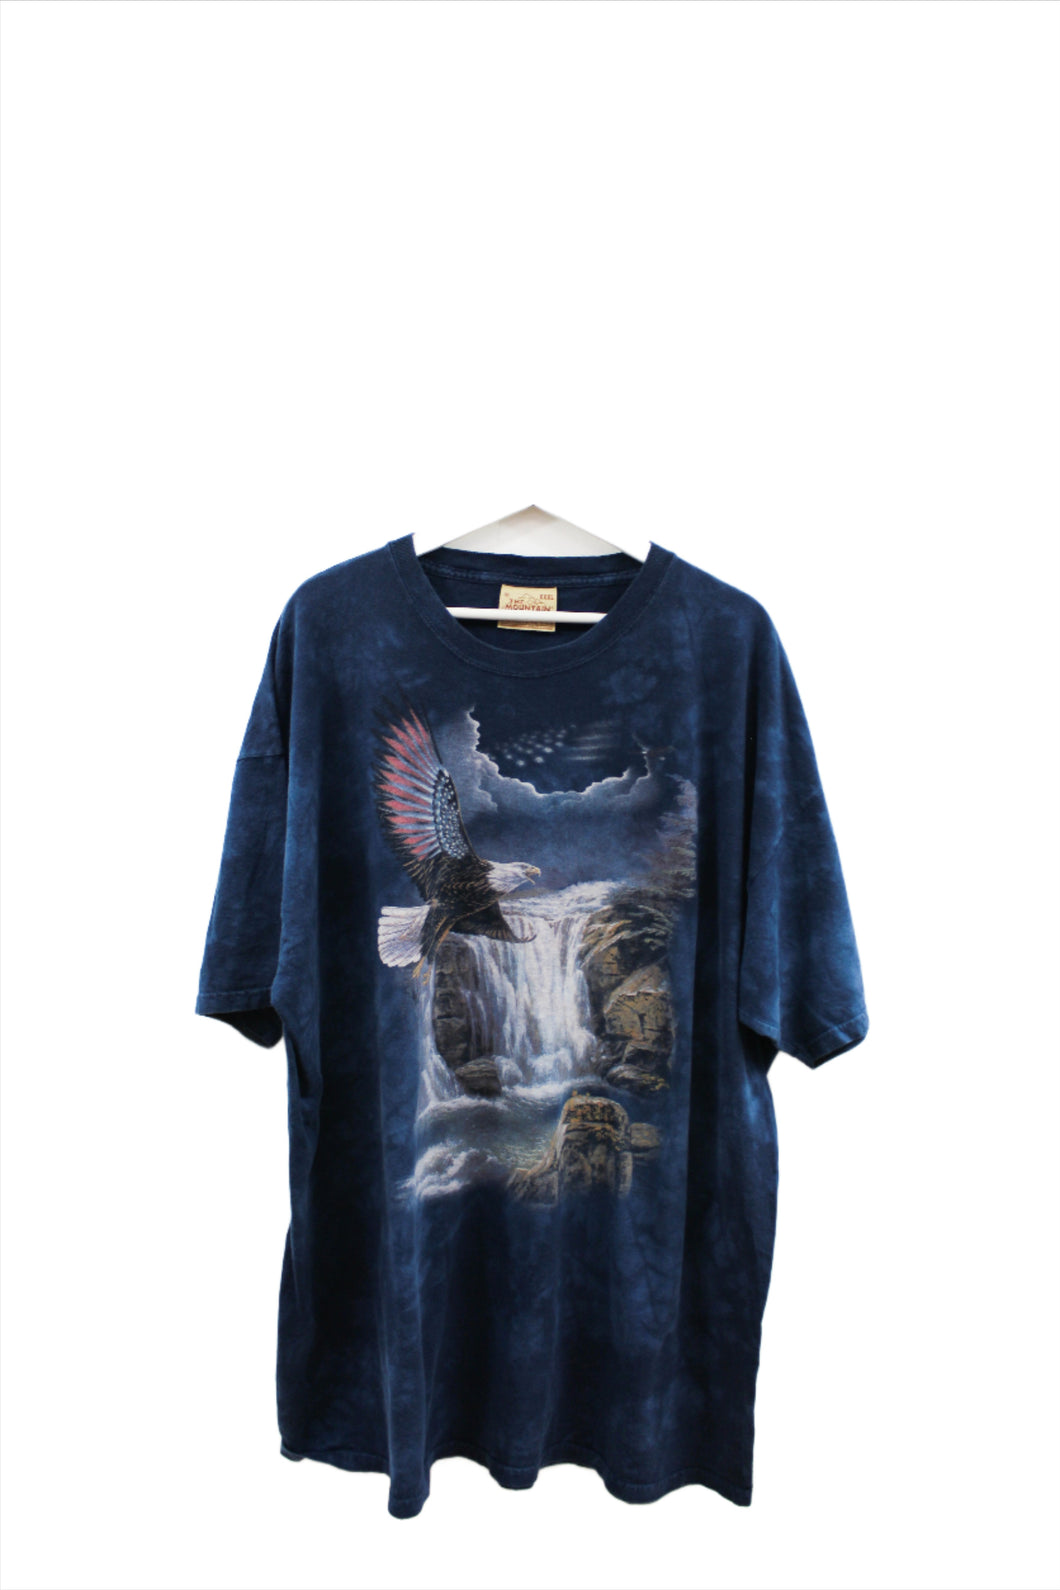 X - Vintage The Mountain American Eagle Flying Over Waterfall Tee